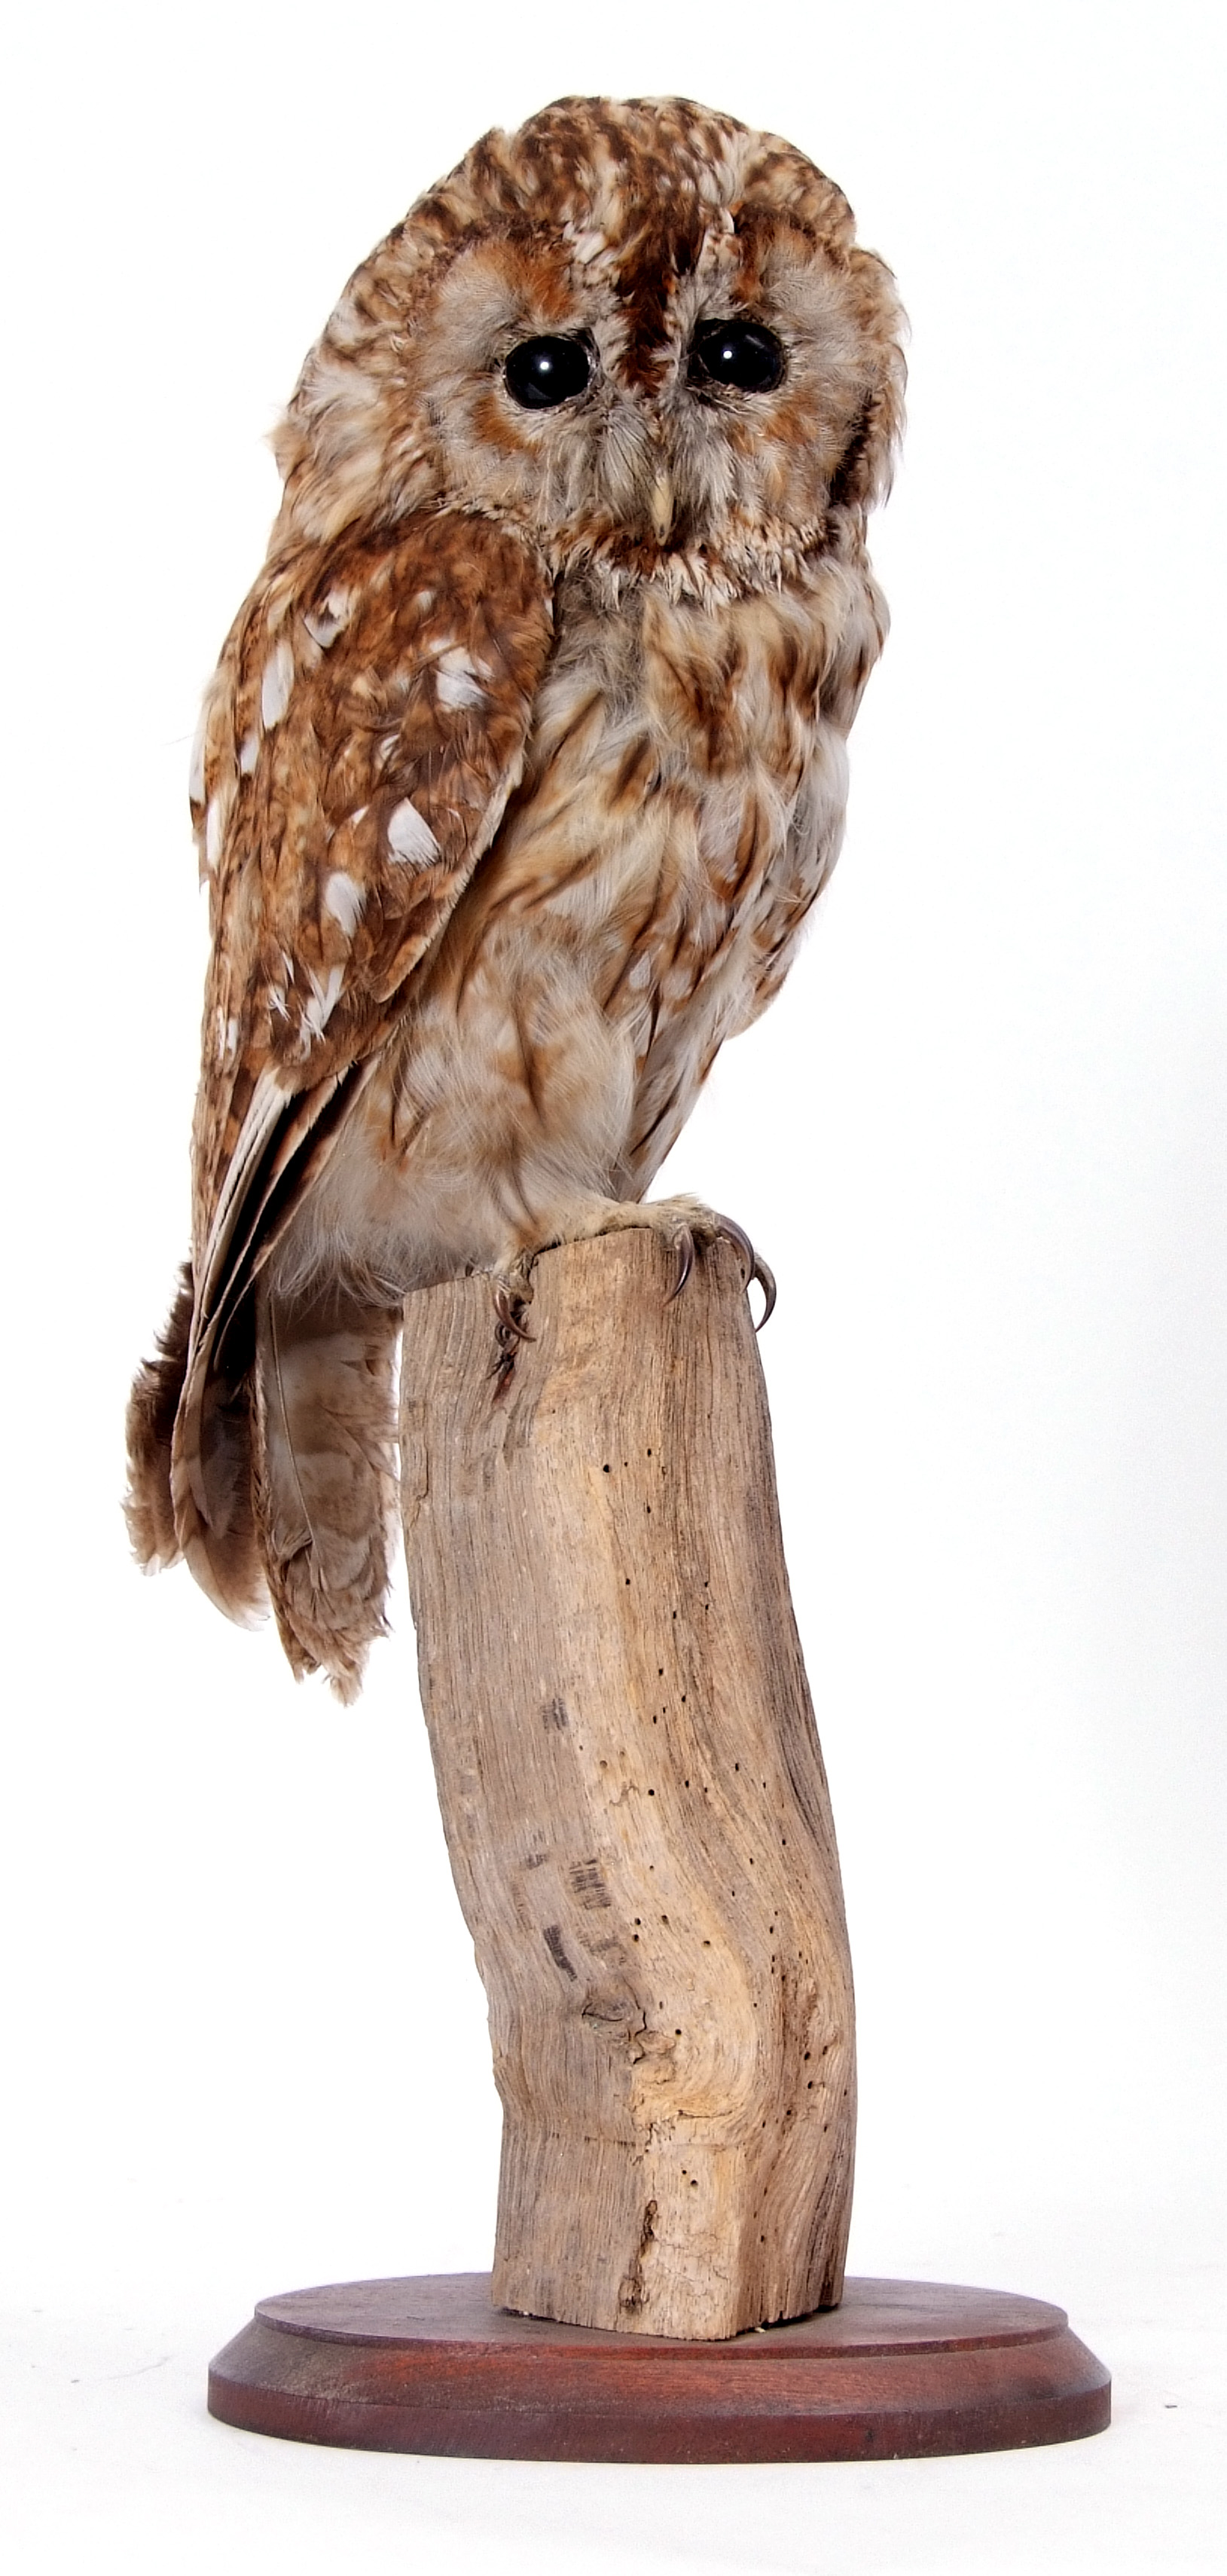 Taxidemy uncased Tawny Owl on wooden stump, 47cm high, sold with Article 10 licence No 574975/02